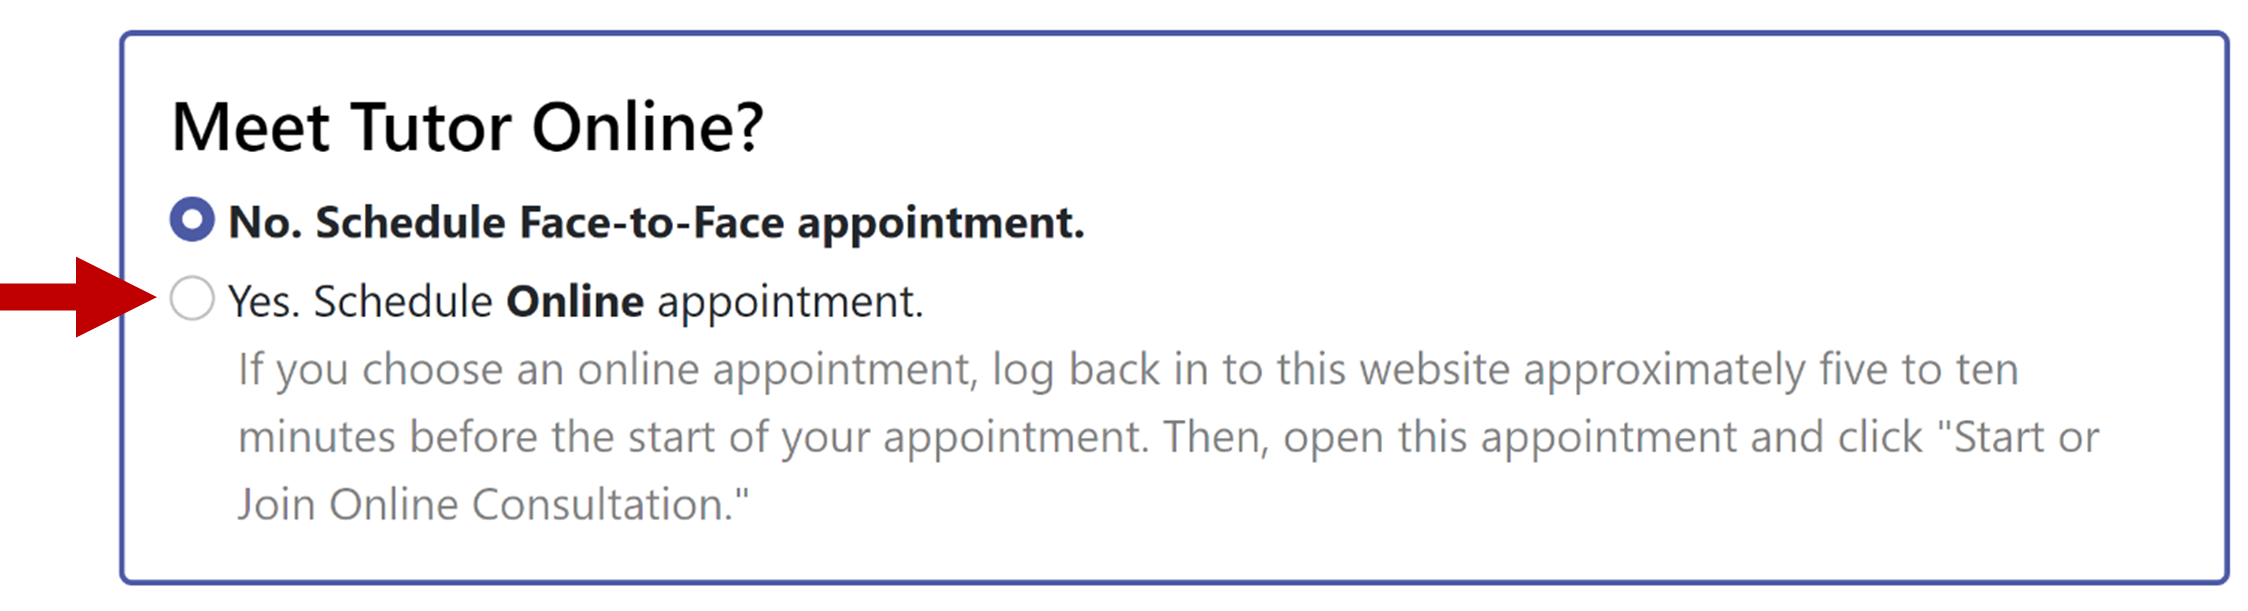 Screenshot of appointment scheduler showing default selection of face-to-face appointment with arrow pointing to the "Yes. Schedule Online appointment" option.